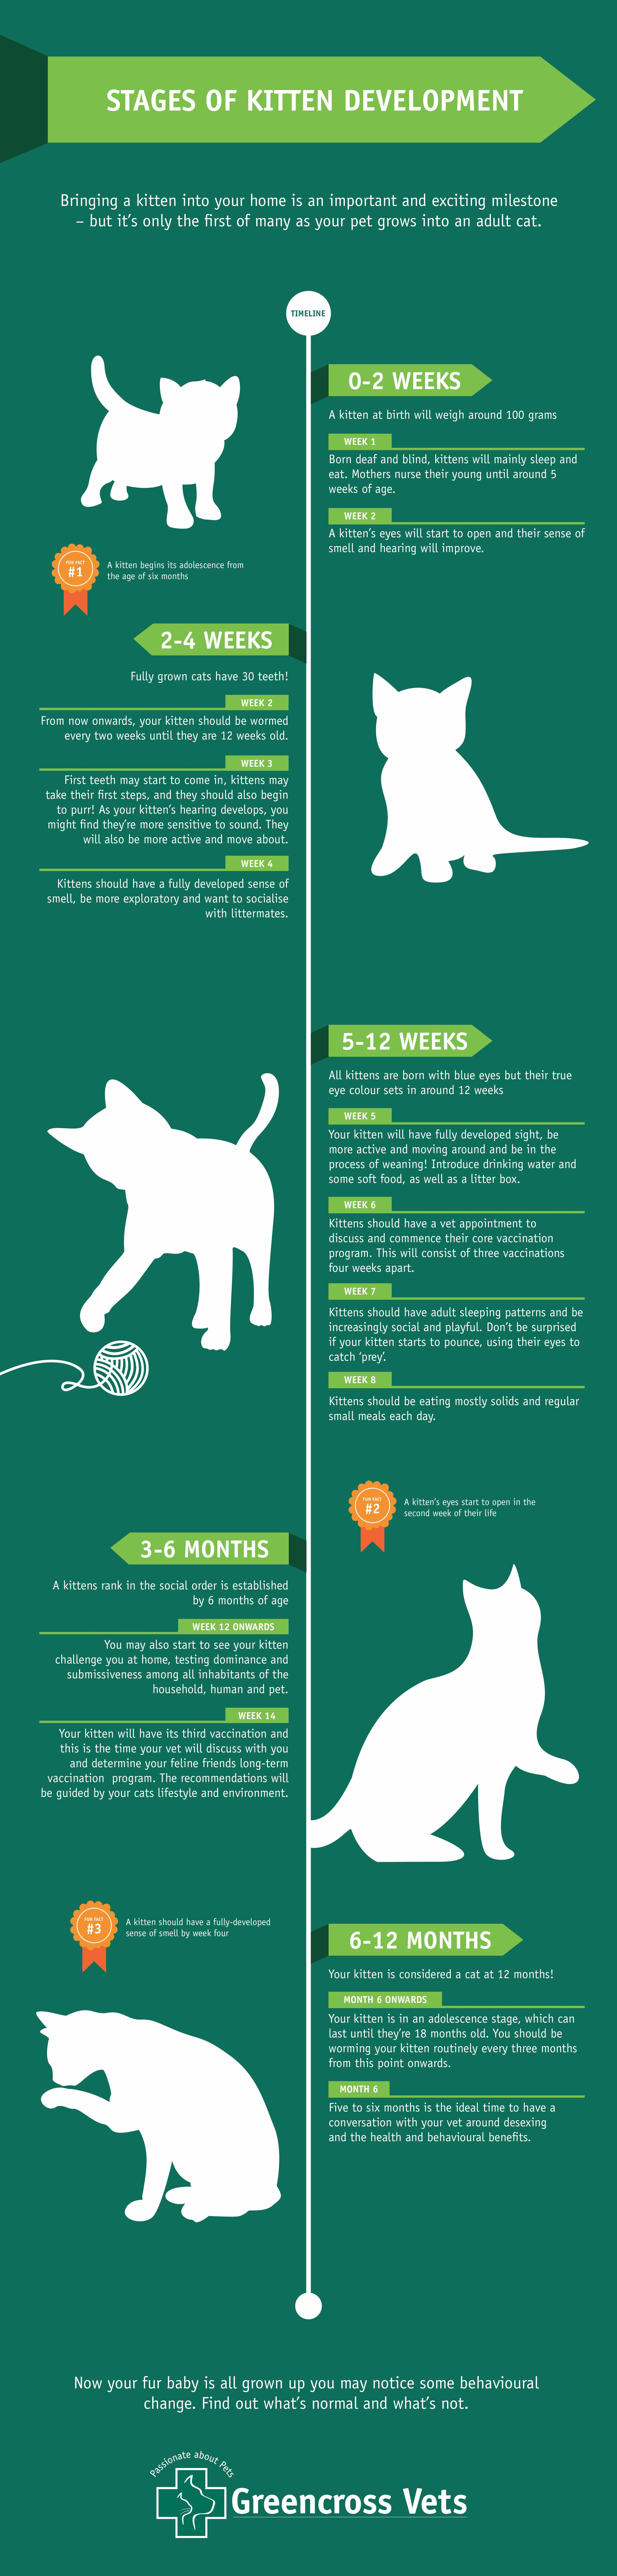 Infographic of the stages of kitten development